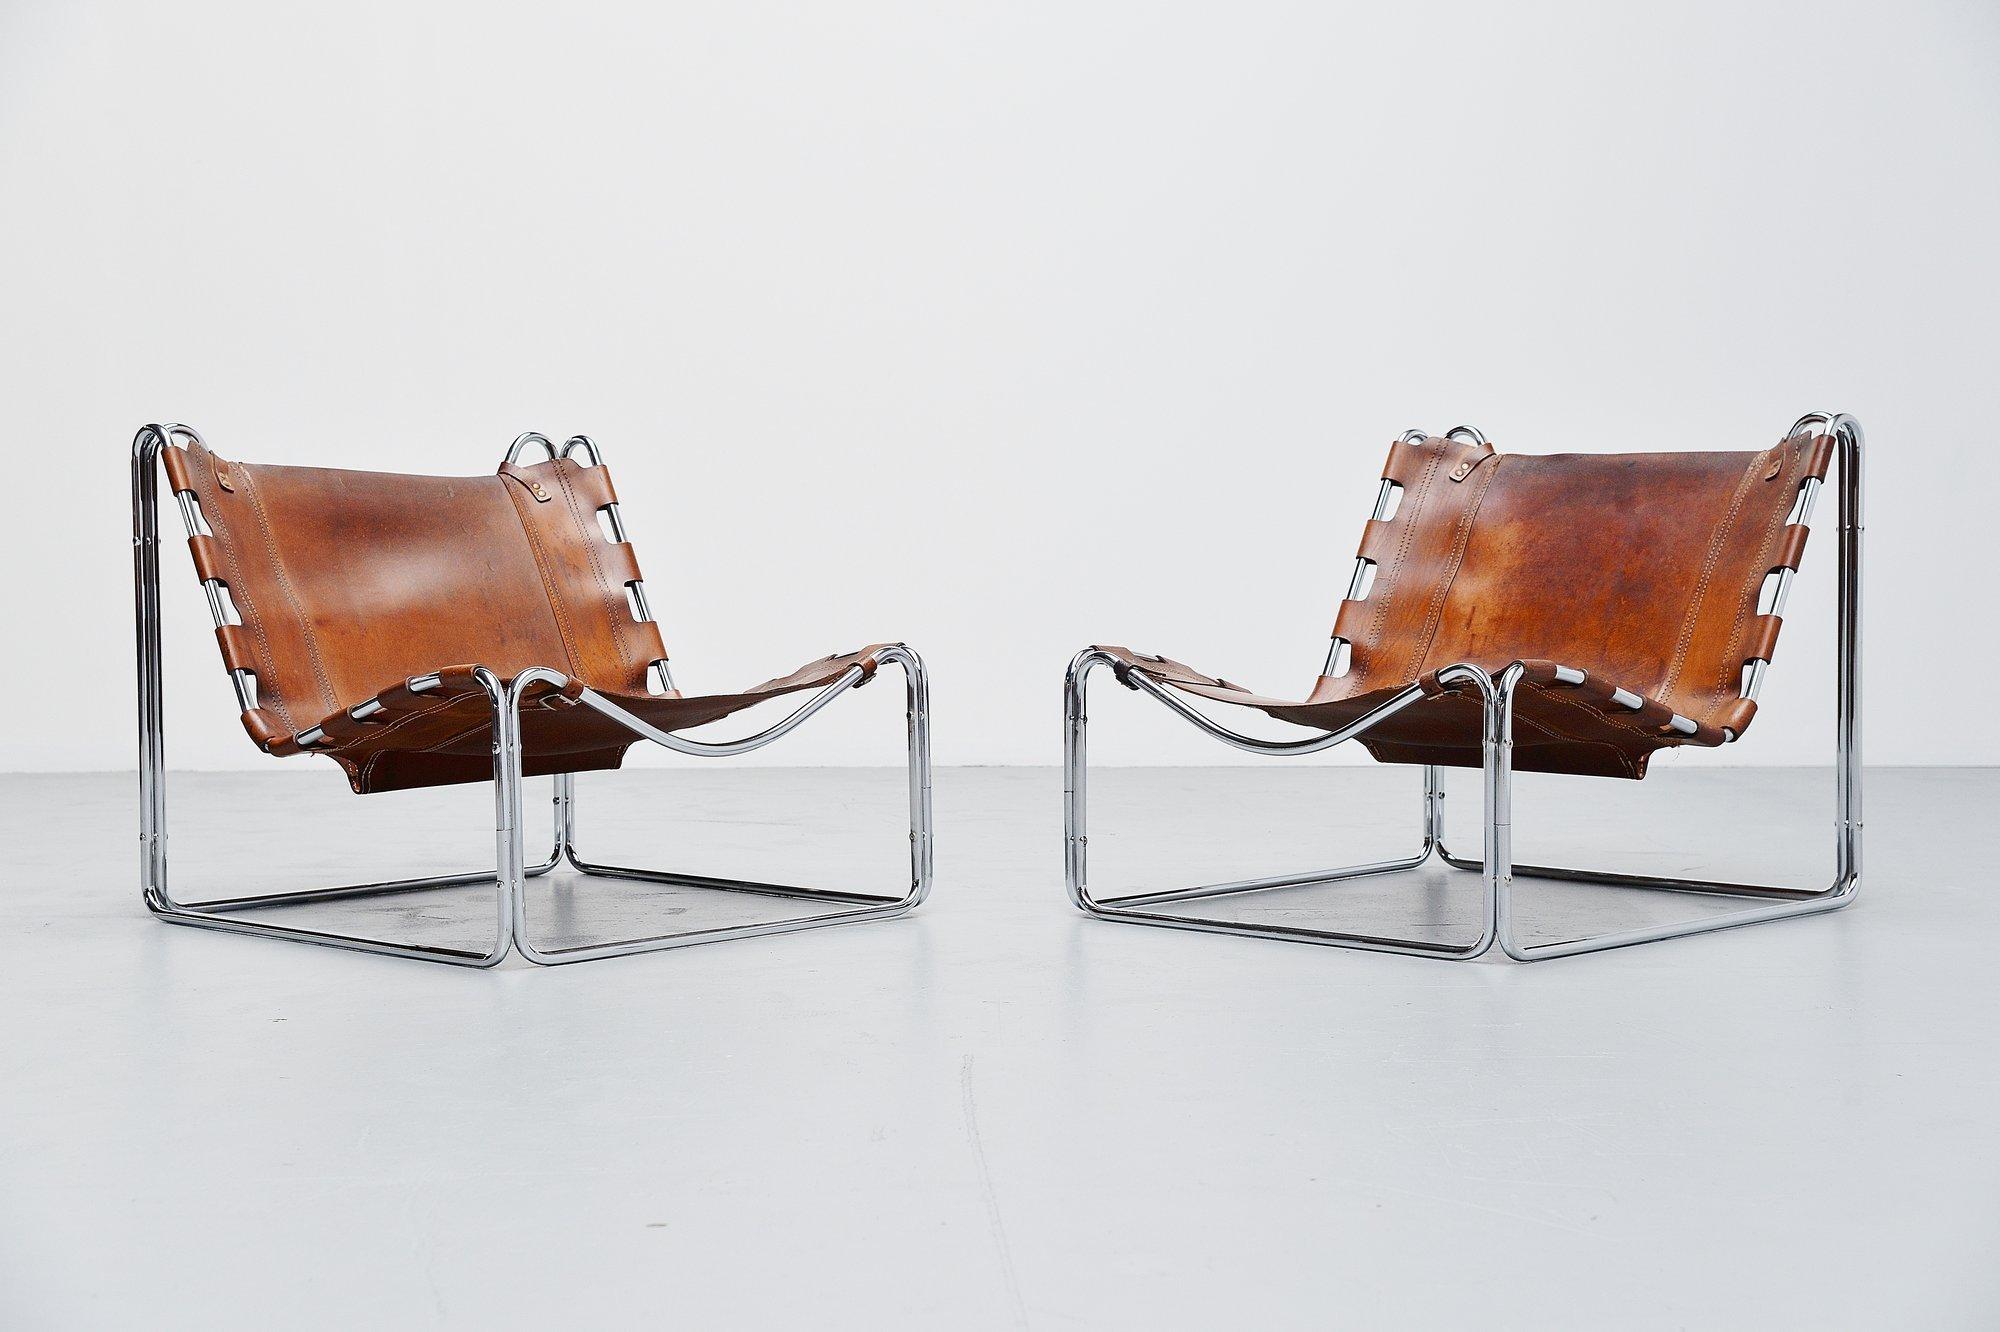 Ultra rare so called 'Fabio' lounge chair pair by Pascal Mourgue and manufactured by Sedia-Steiner, France 1970. This very nice low lounge chair pair is made of chrome plated tubular metal has an amazing shape! The nicely patinated natural leather